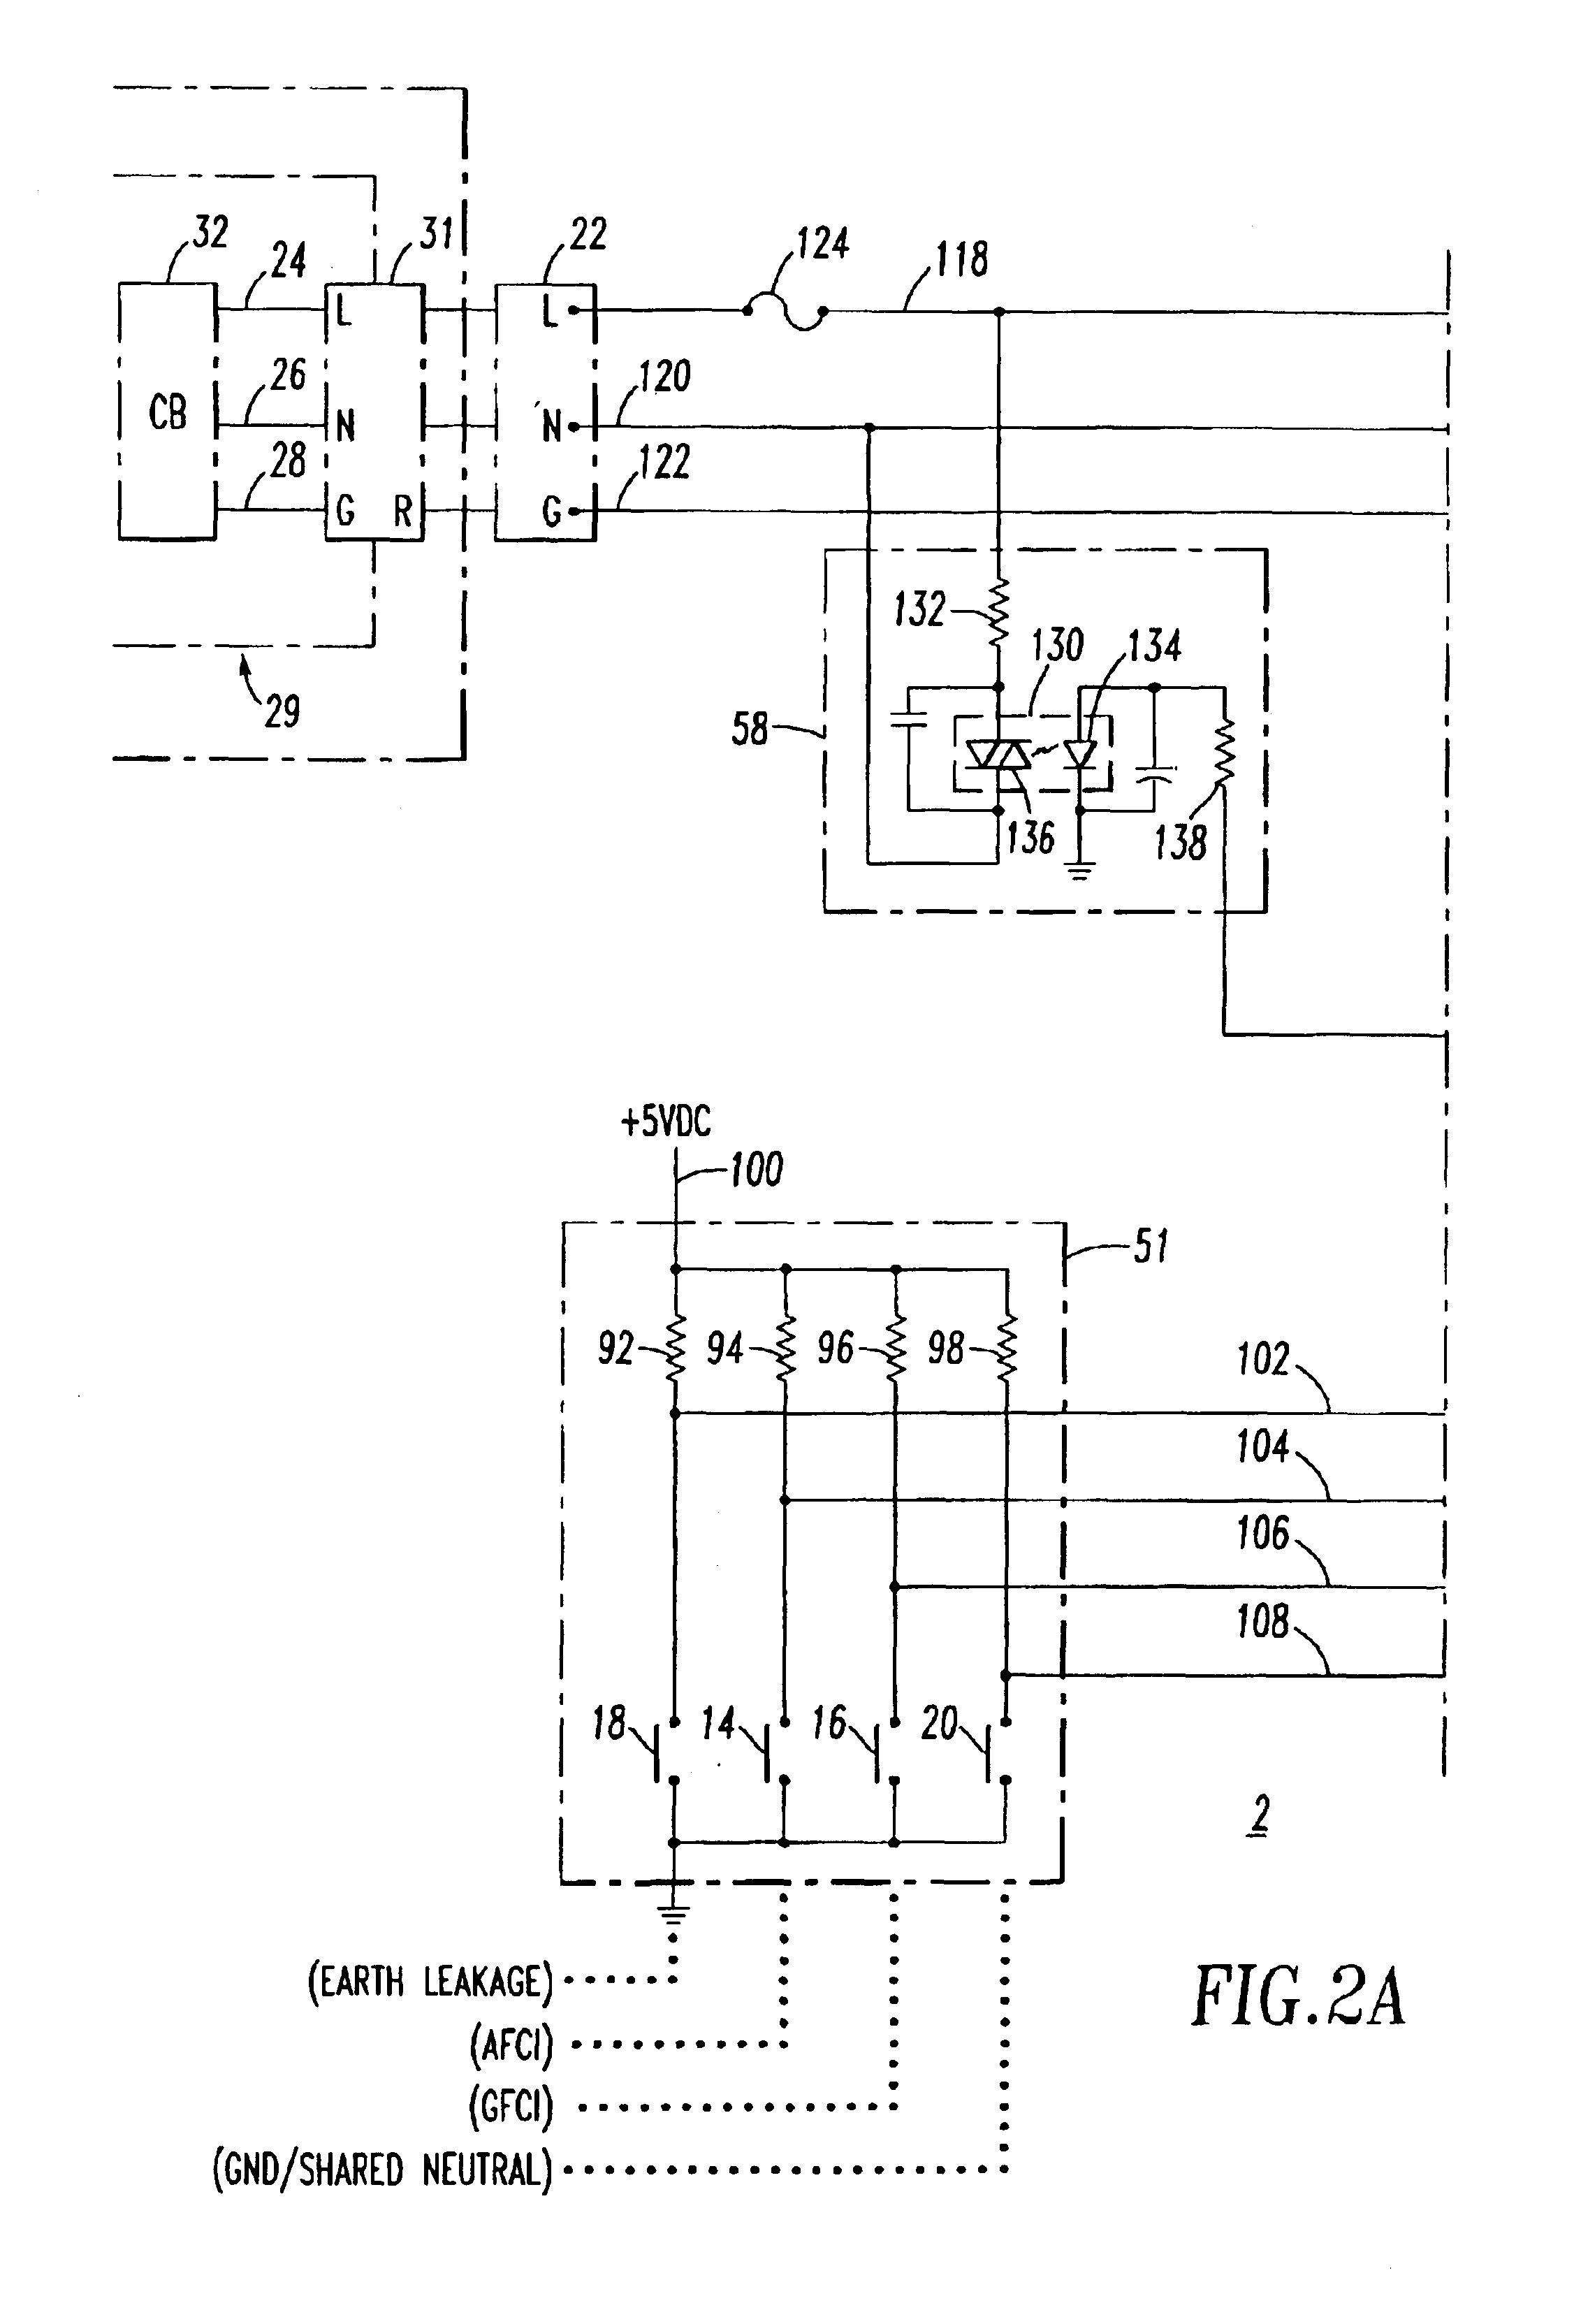 Power circuit tester apparatus and method